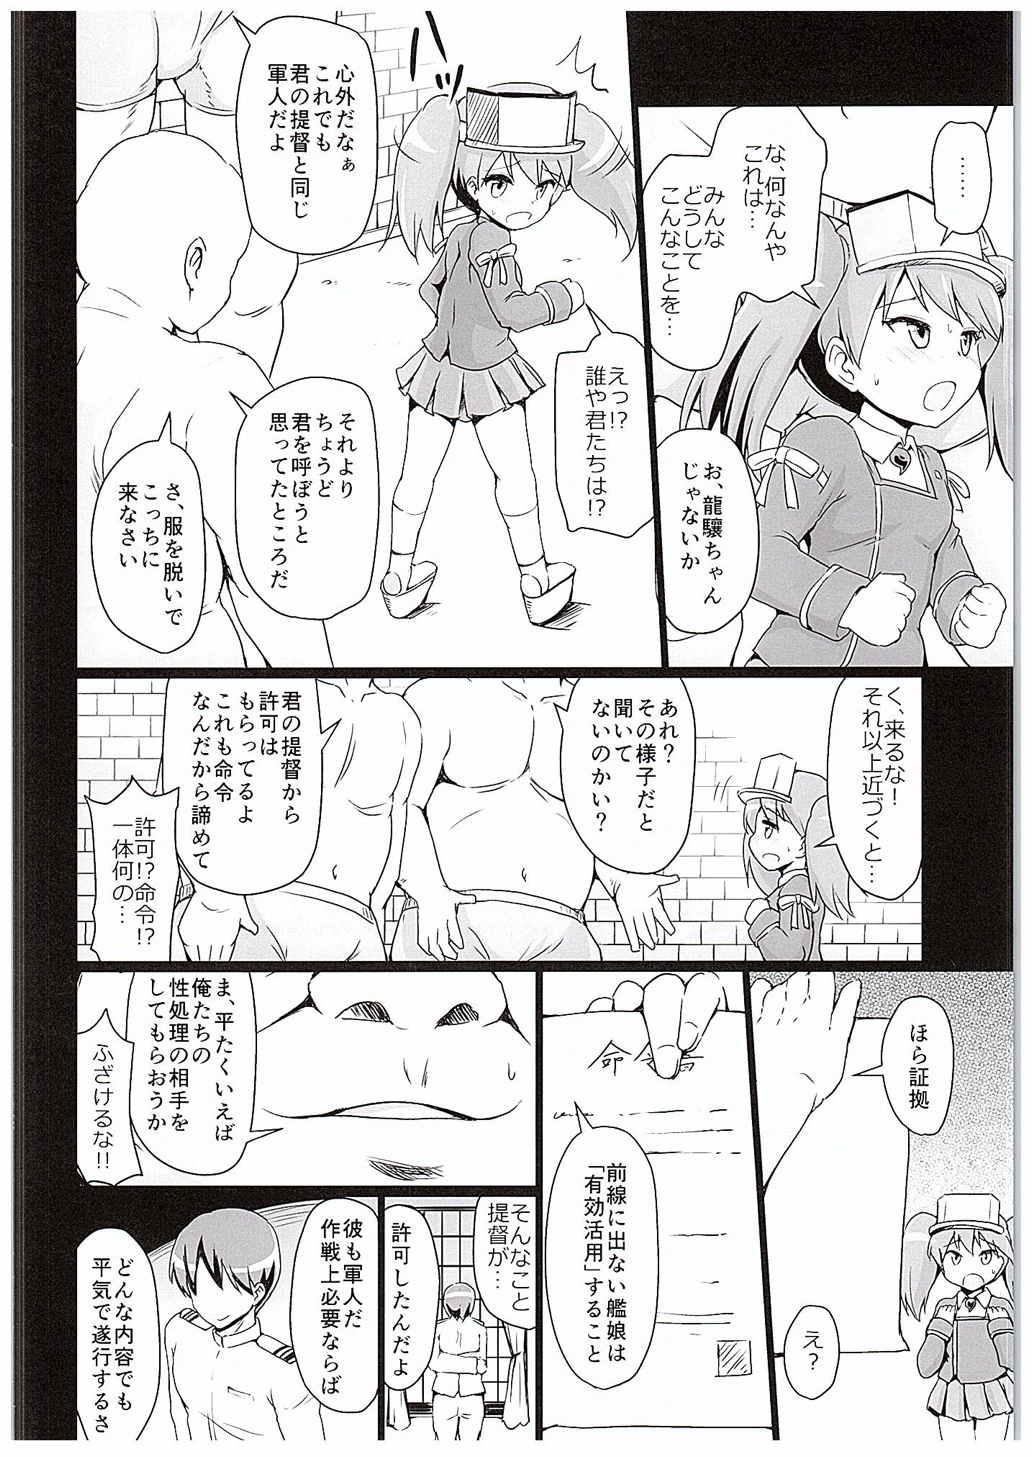 Salope The naval arsenal - Kantai collection Little - Page 5